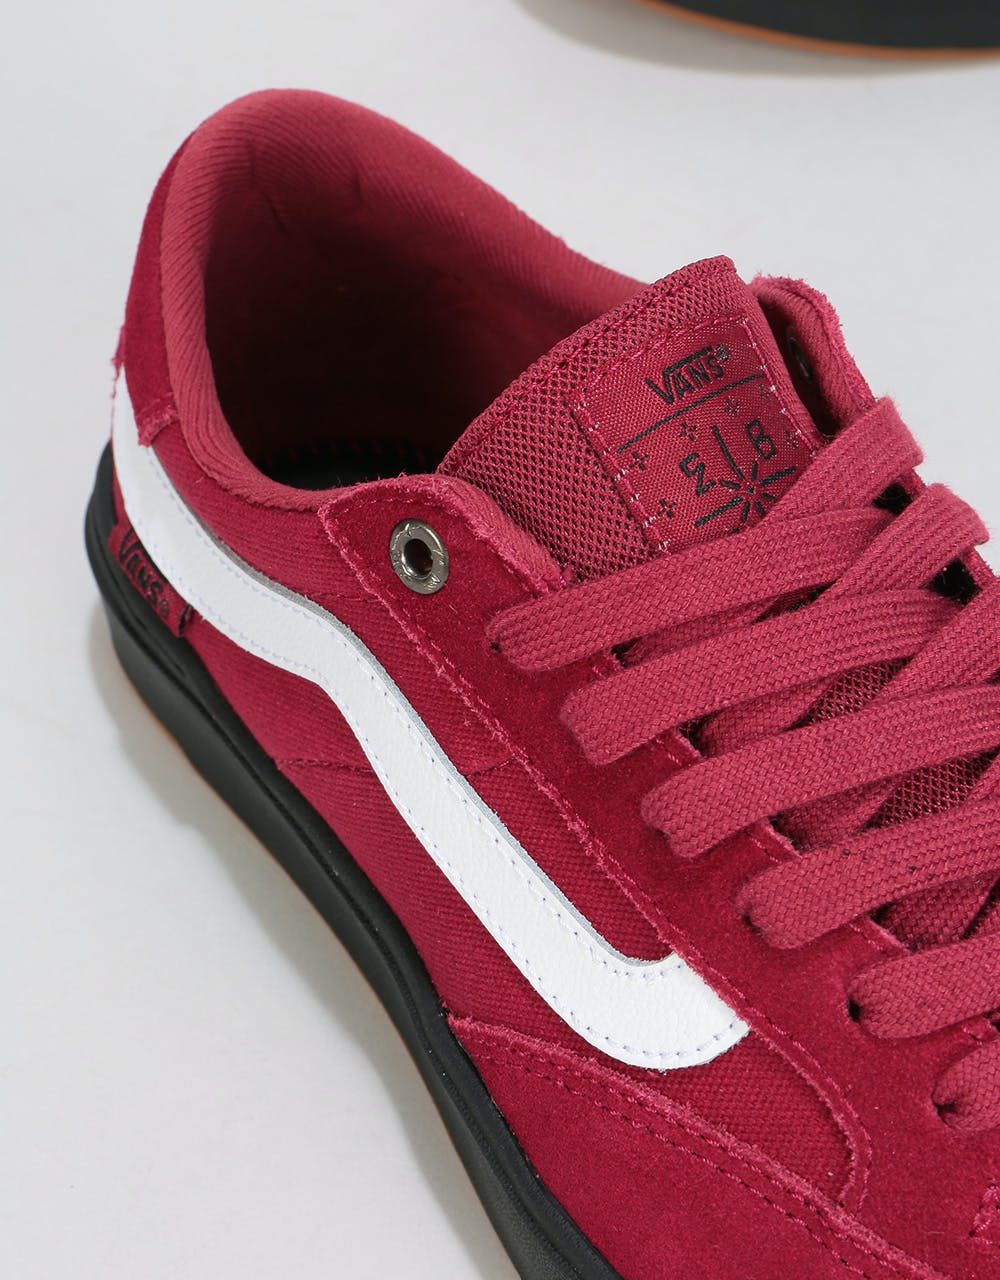 Vans Berle Pro Skate Shoes - Rumba Red – Route One